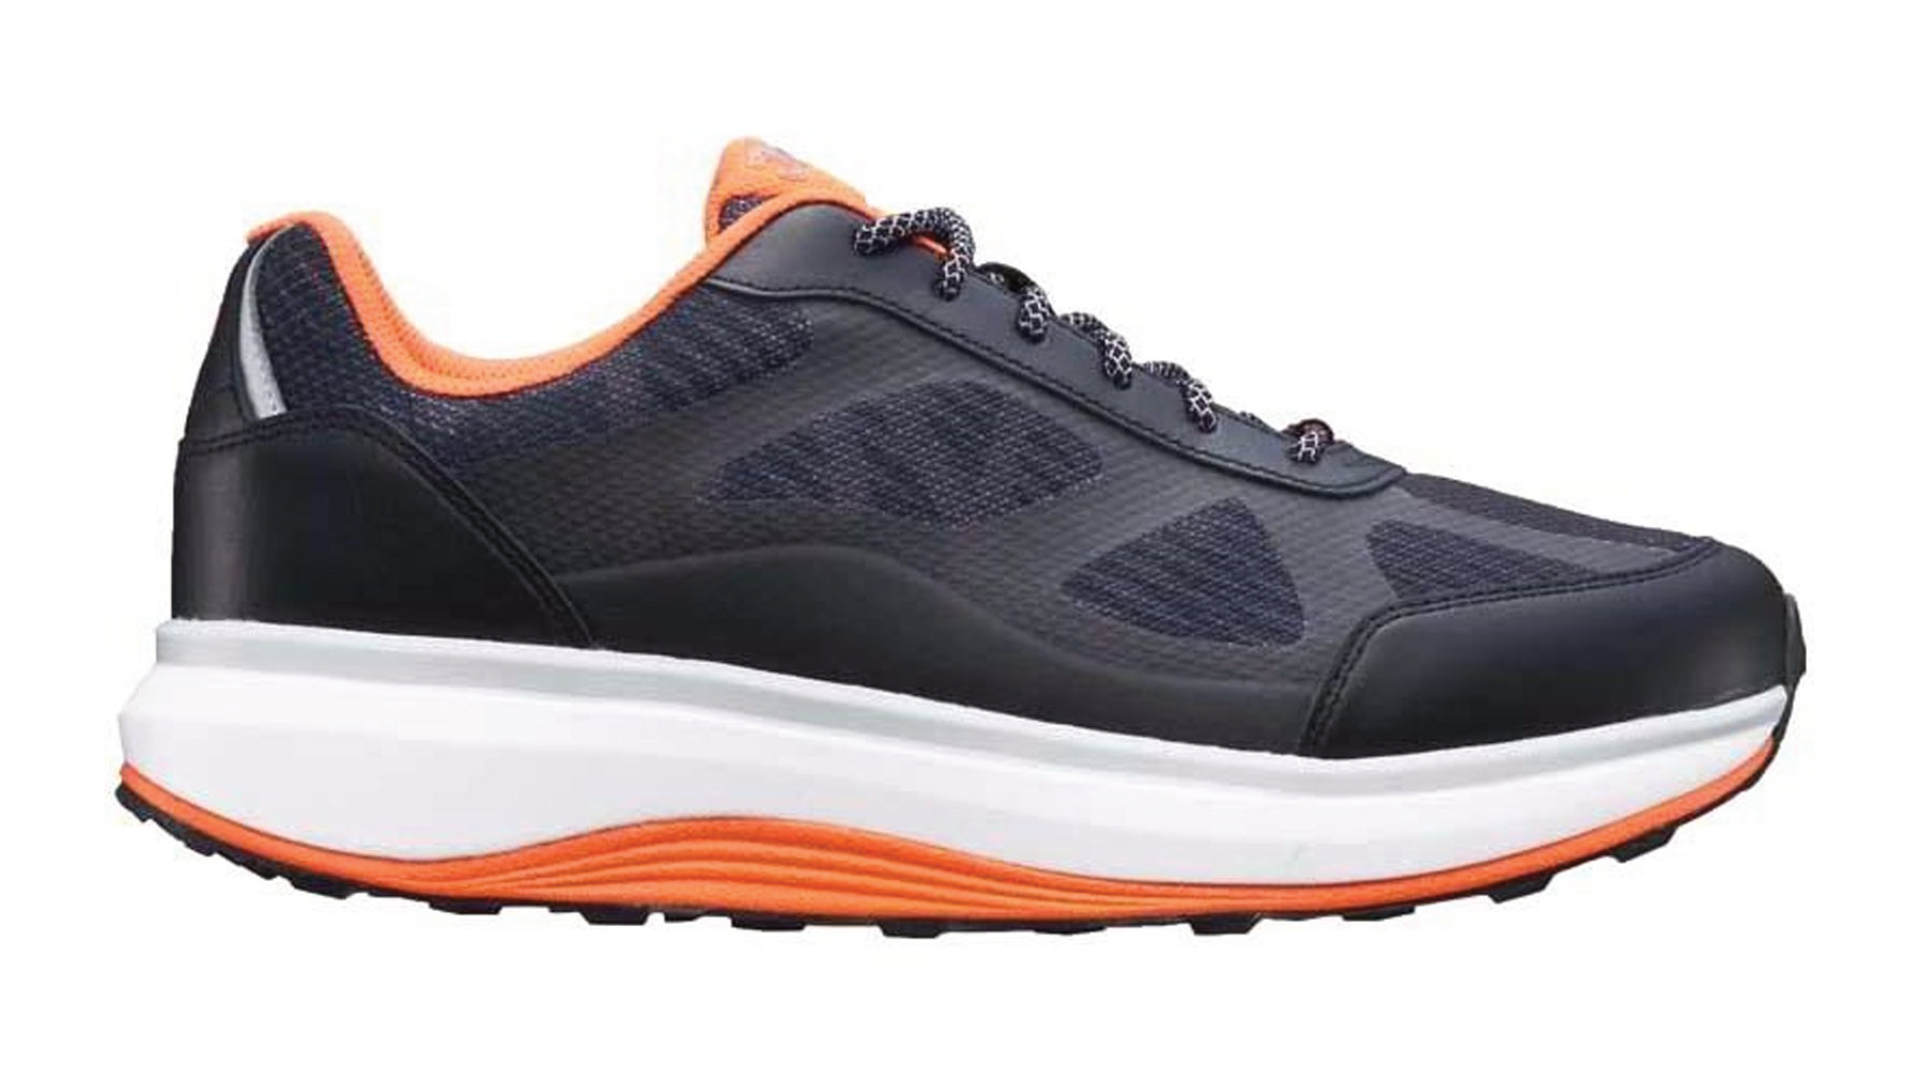 A navy Joya Cancun II shoe, featuring the unique Joya sole technology, providing an optimal balance of stability and flexibility, ideal for reducing symptoms of Morton's neuroma.